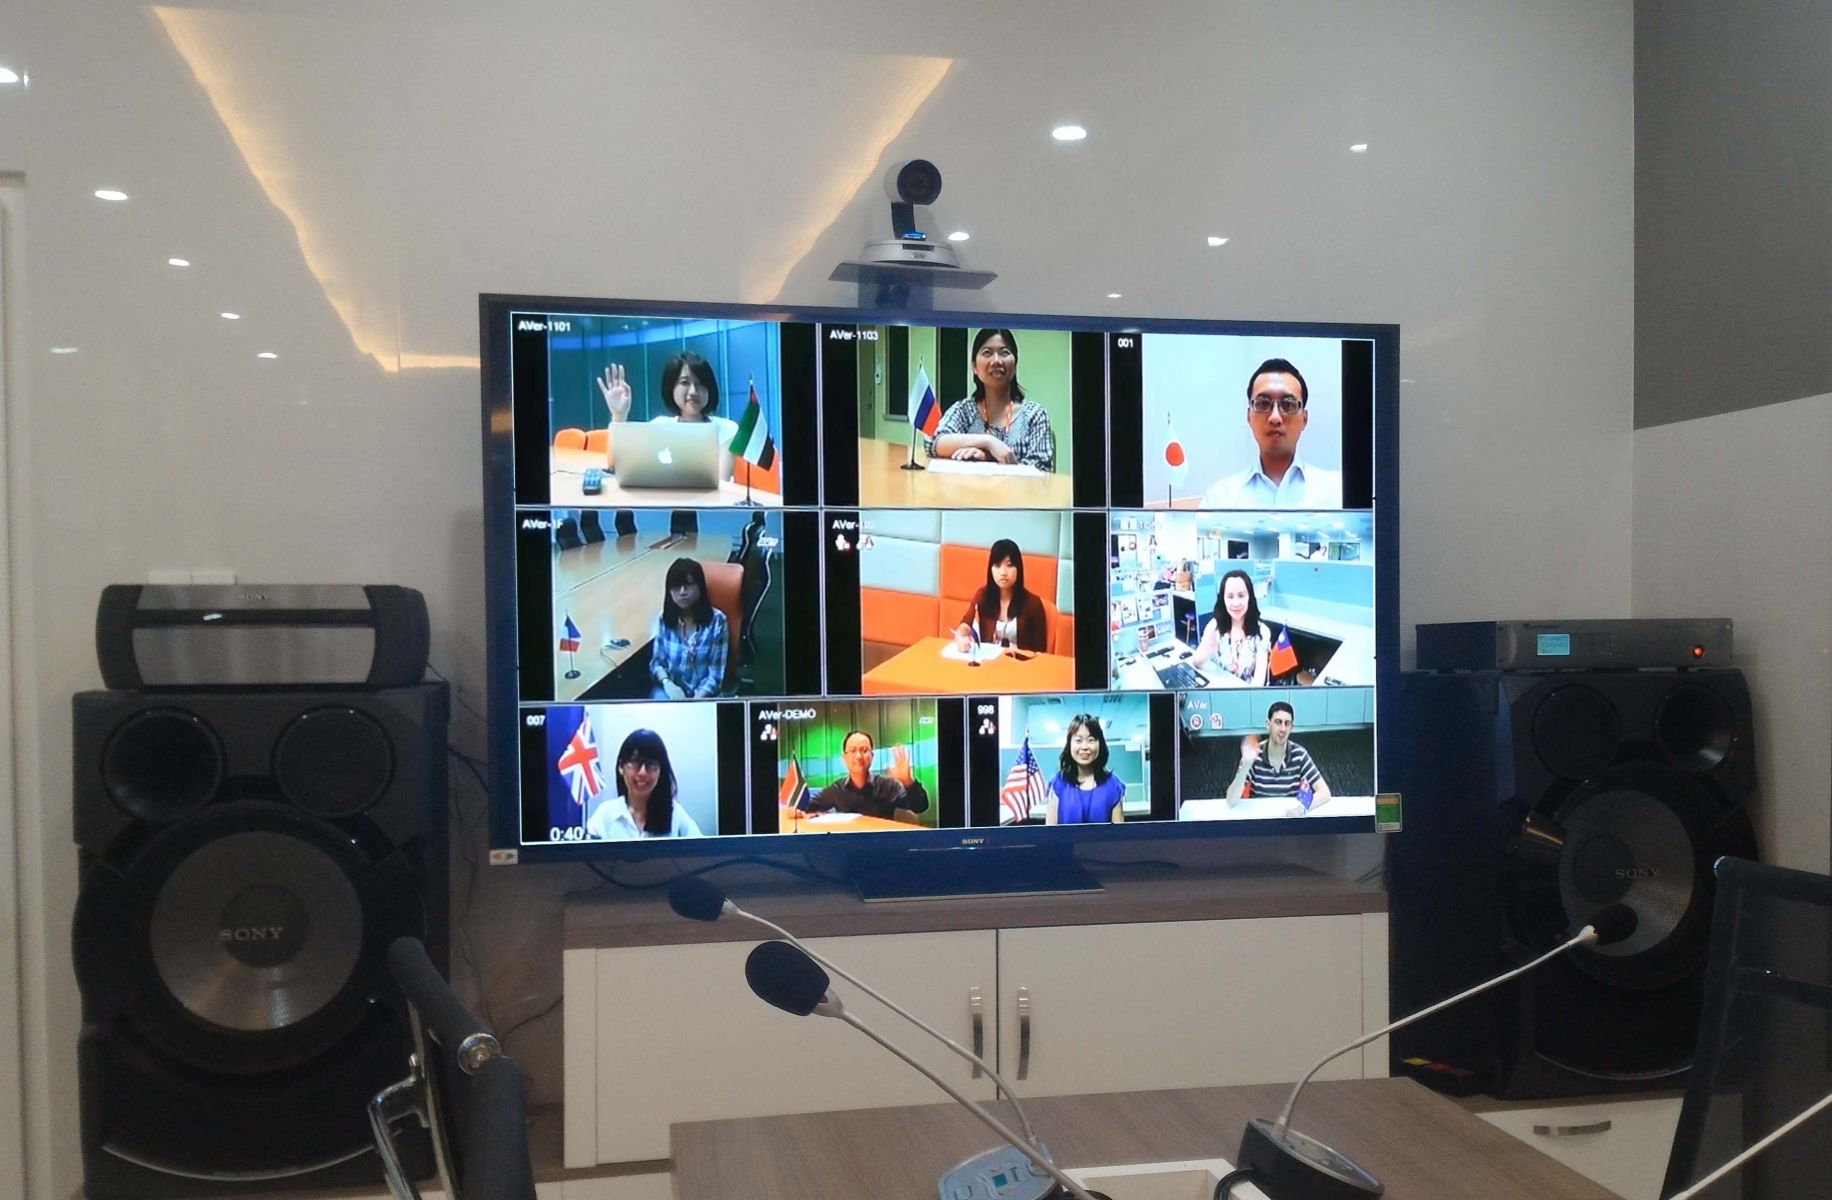 Multipoint video conferencing equipment